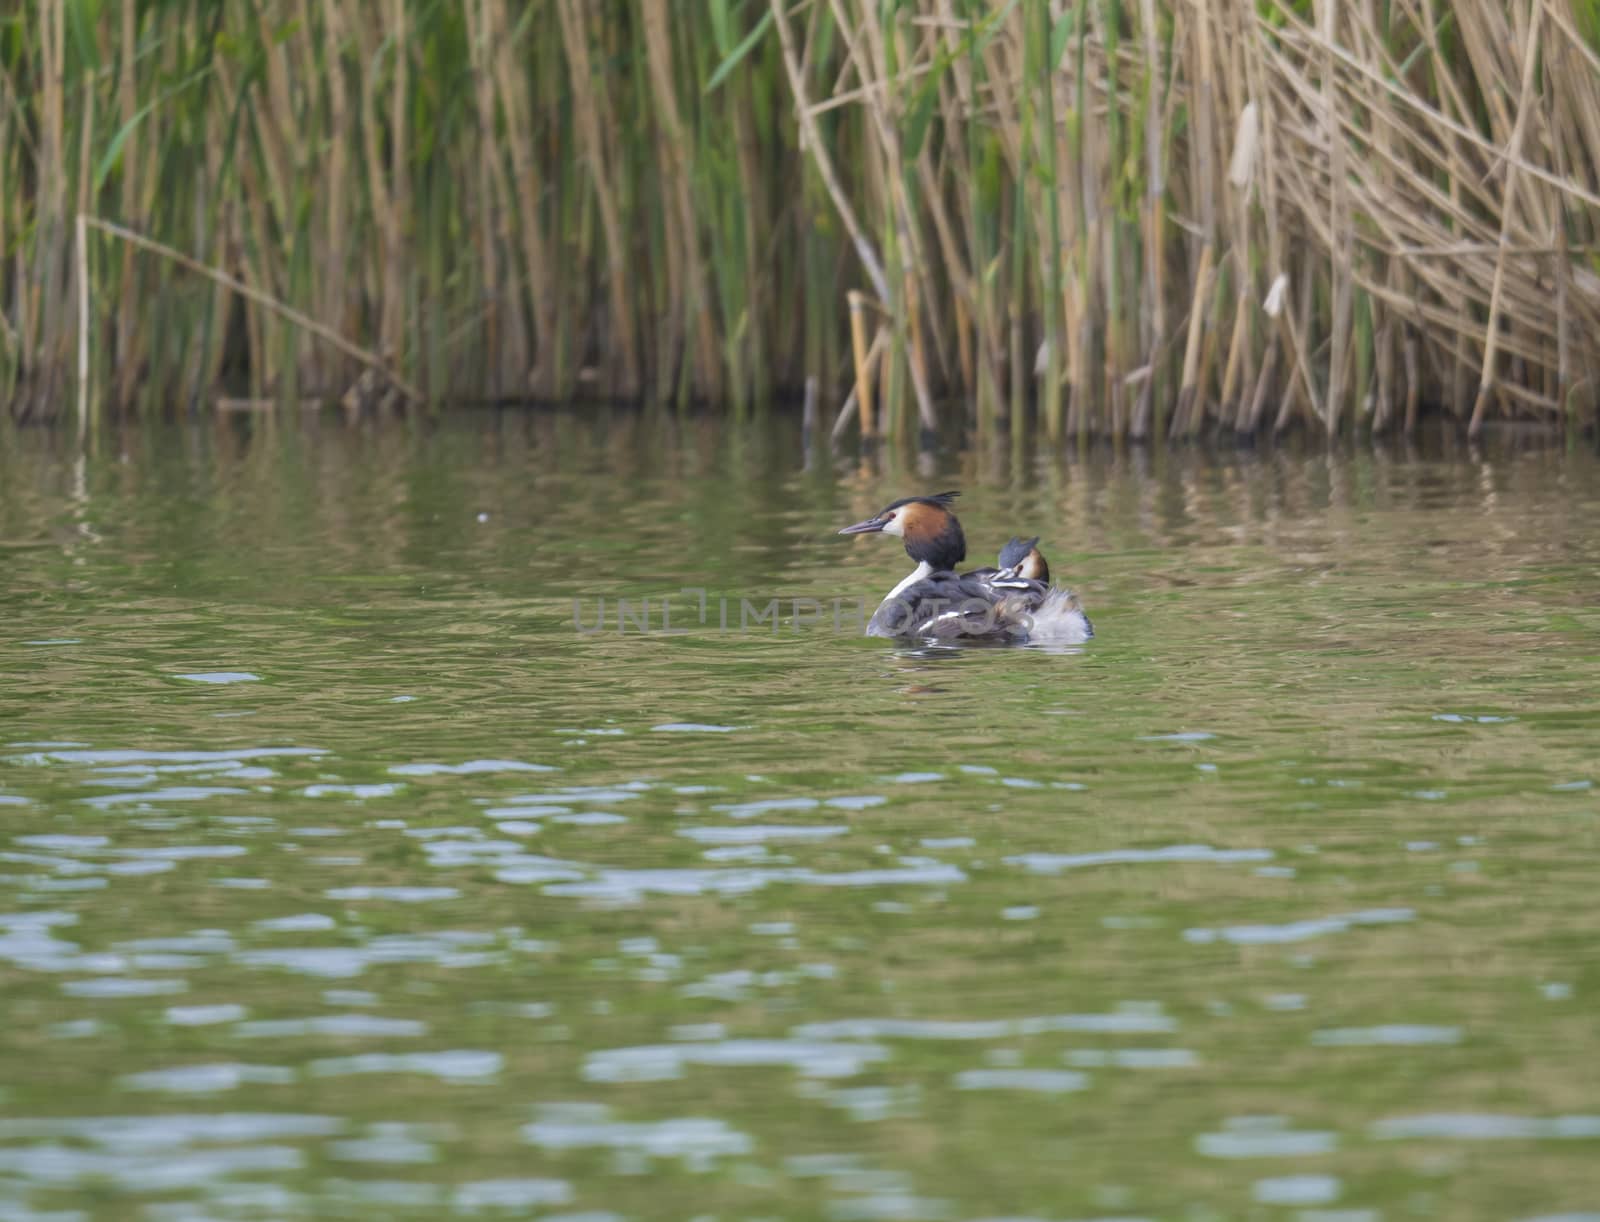 The adult great crested grebe, Podiceps cristatus on green clear lake with reeds